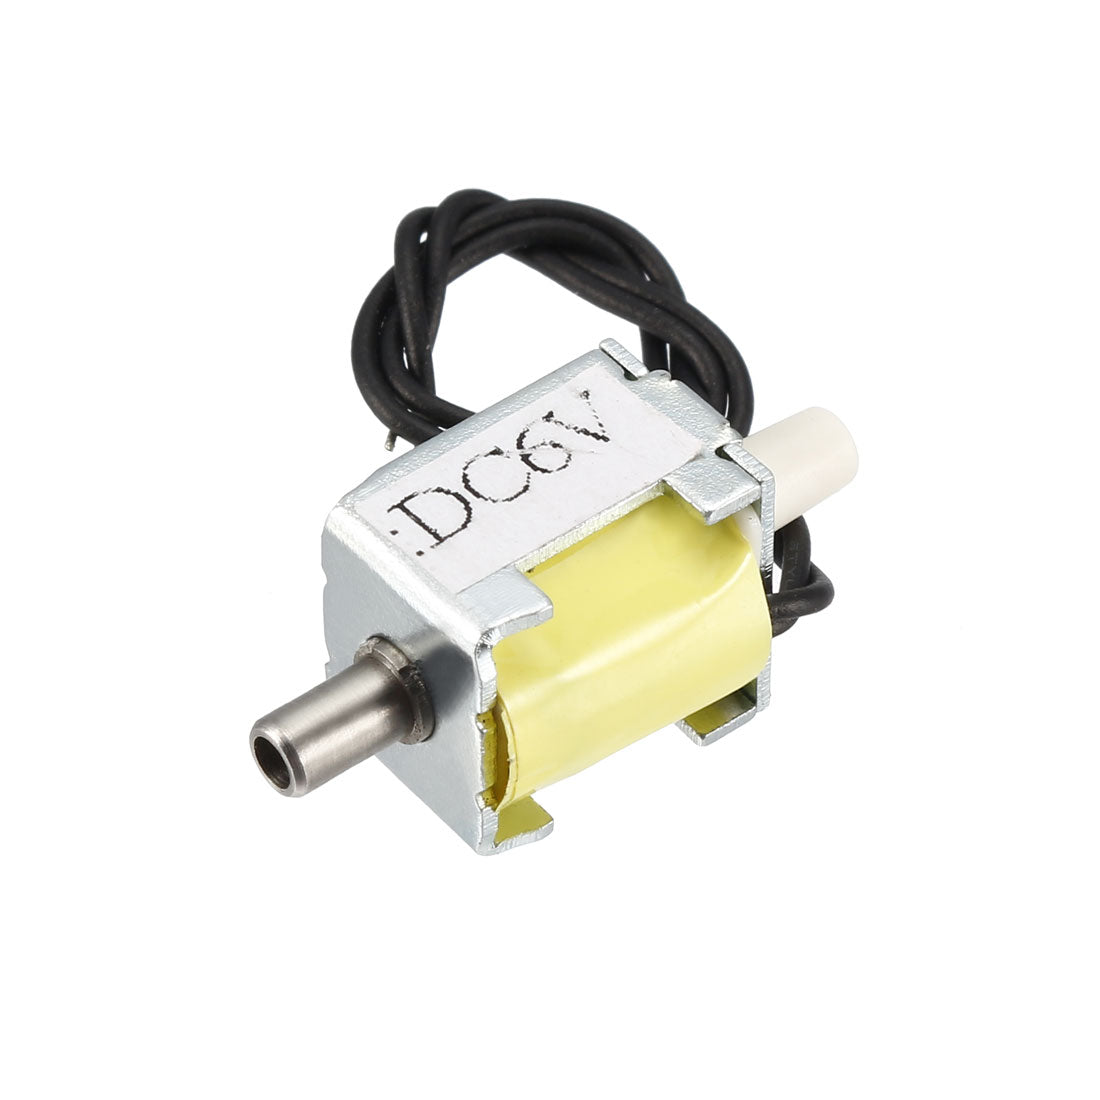 uxcell Uxcell Miniature Solenoid Valve 2 Way Normally Closed DC6V 0.32A Air Solenoid Valve